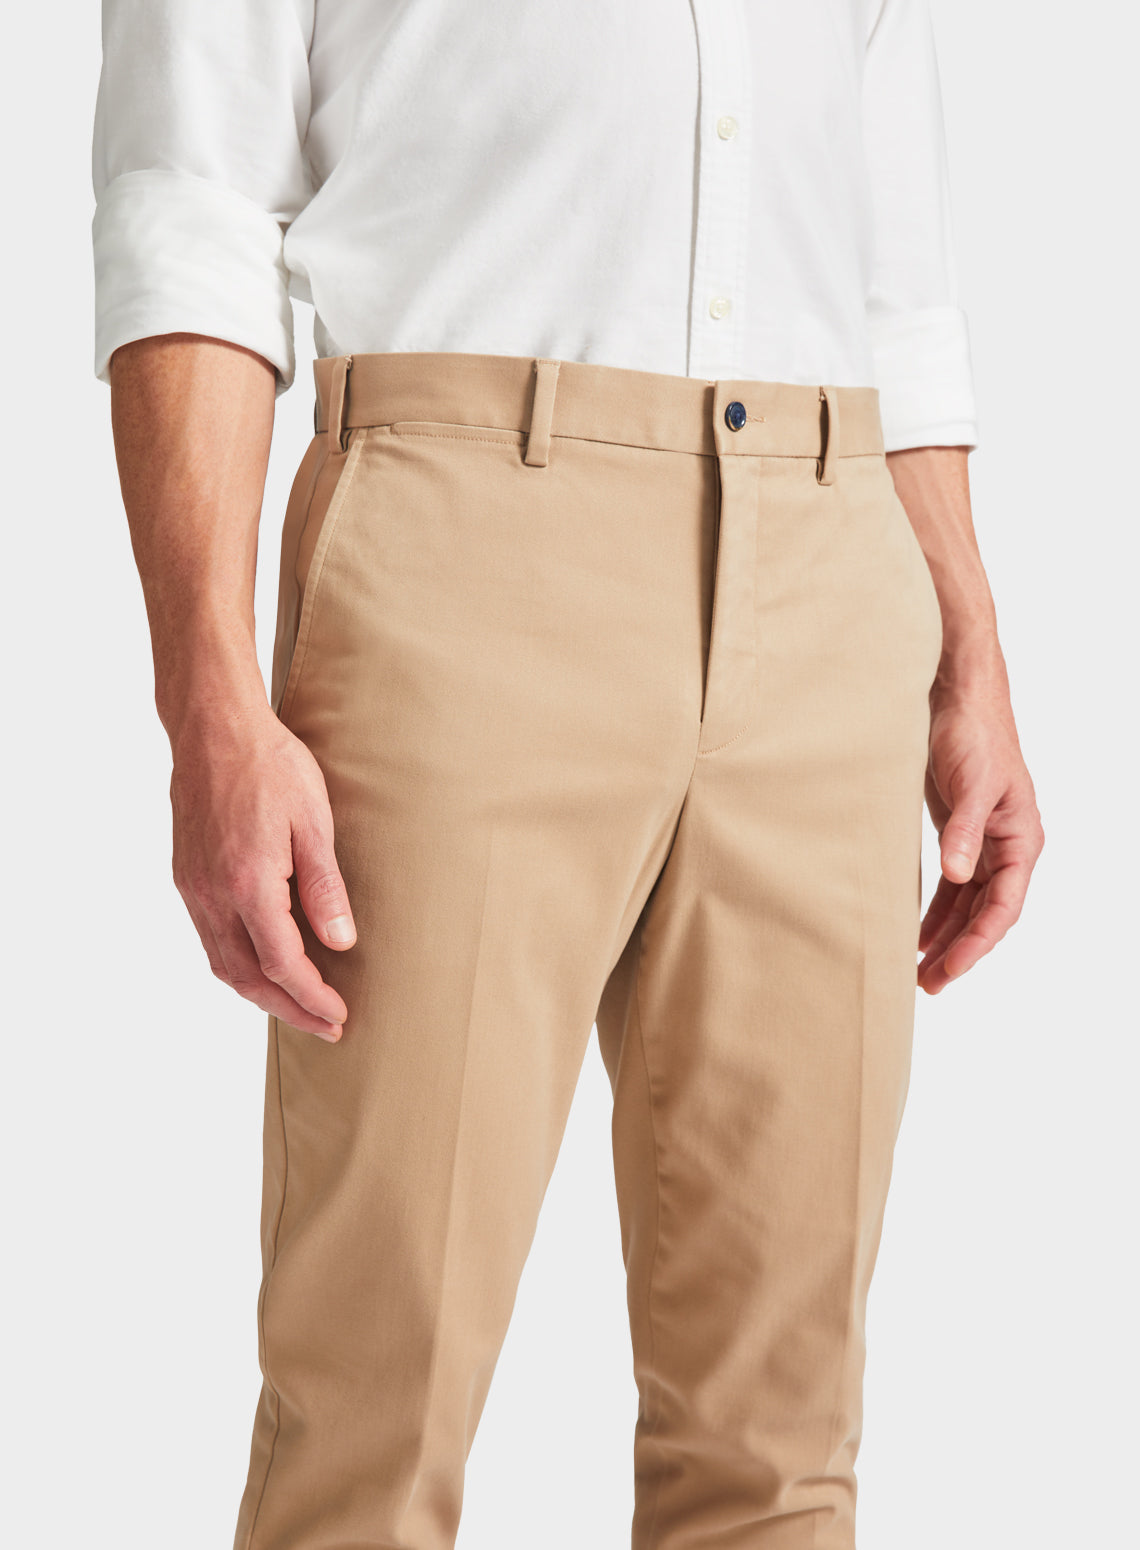 Classic Chinos - Camel